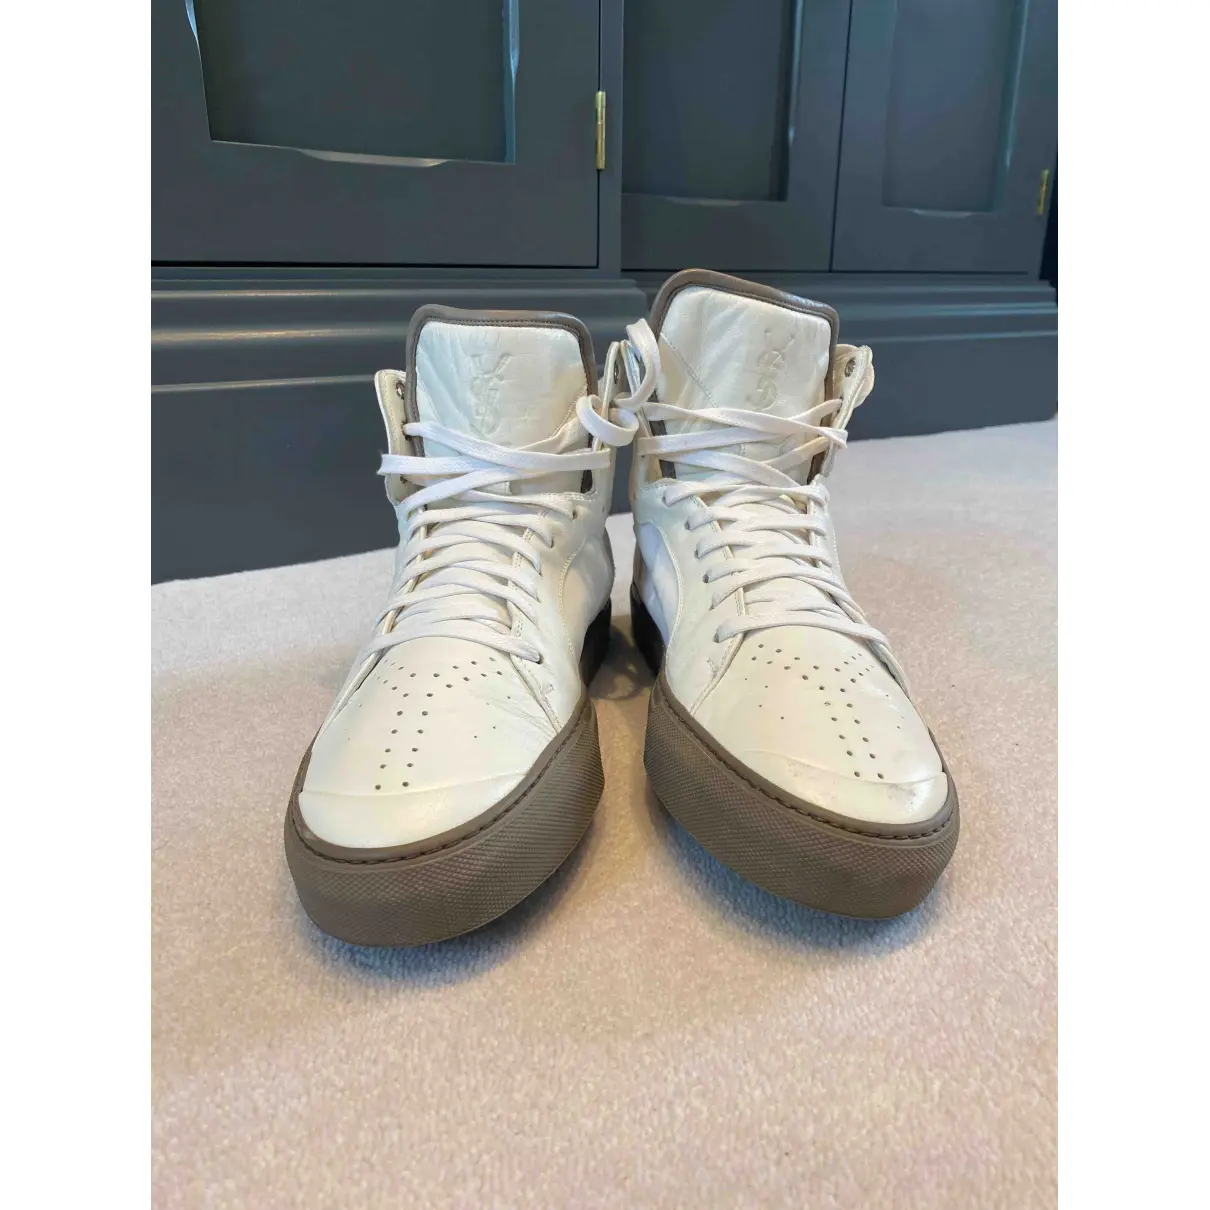 Buy Saint Laurent Bedford leather high trainers online